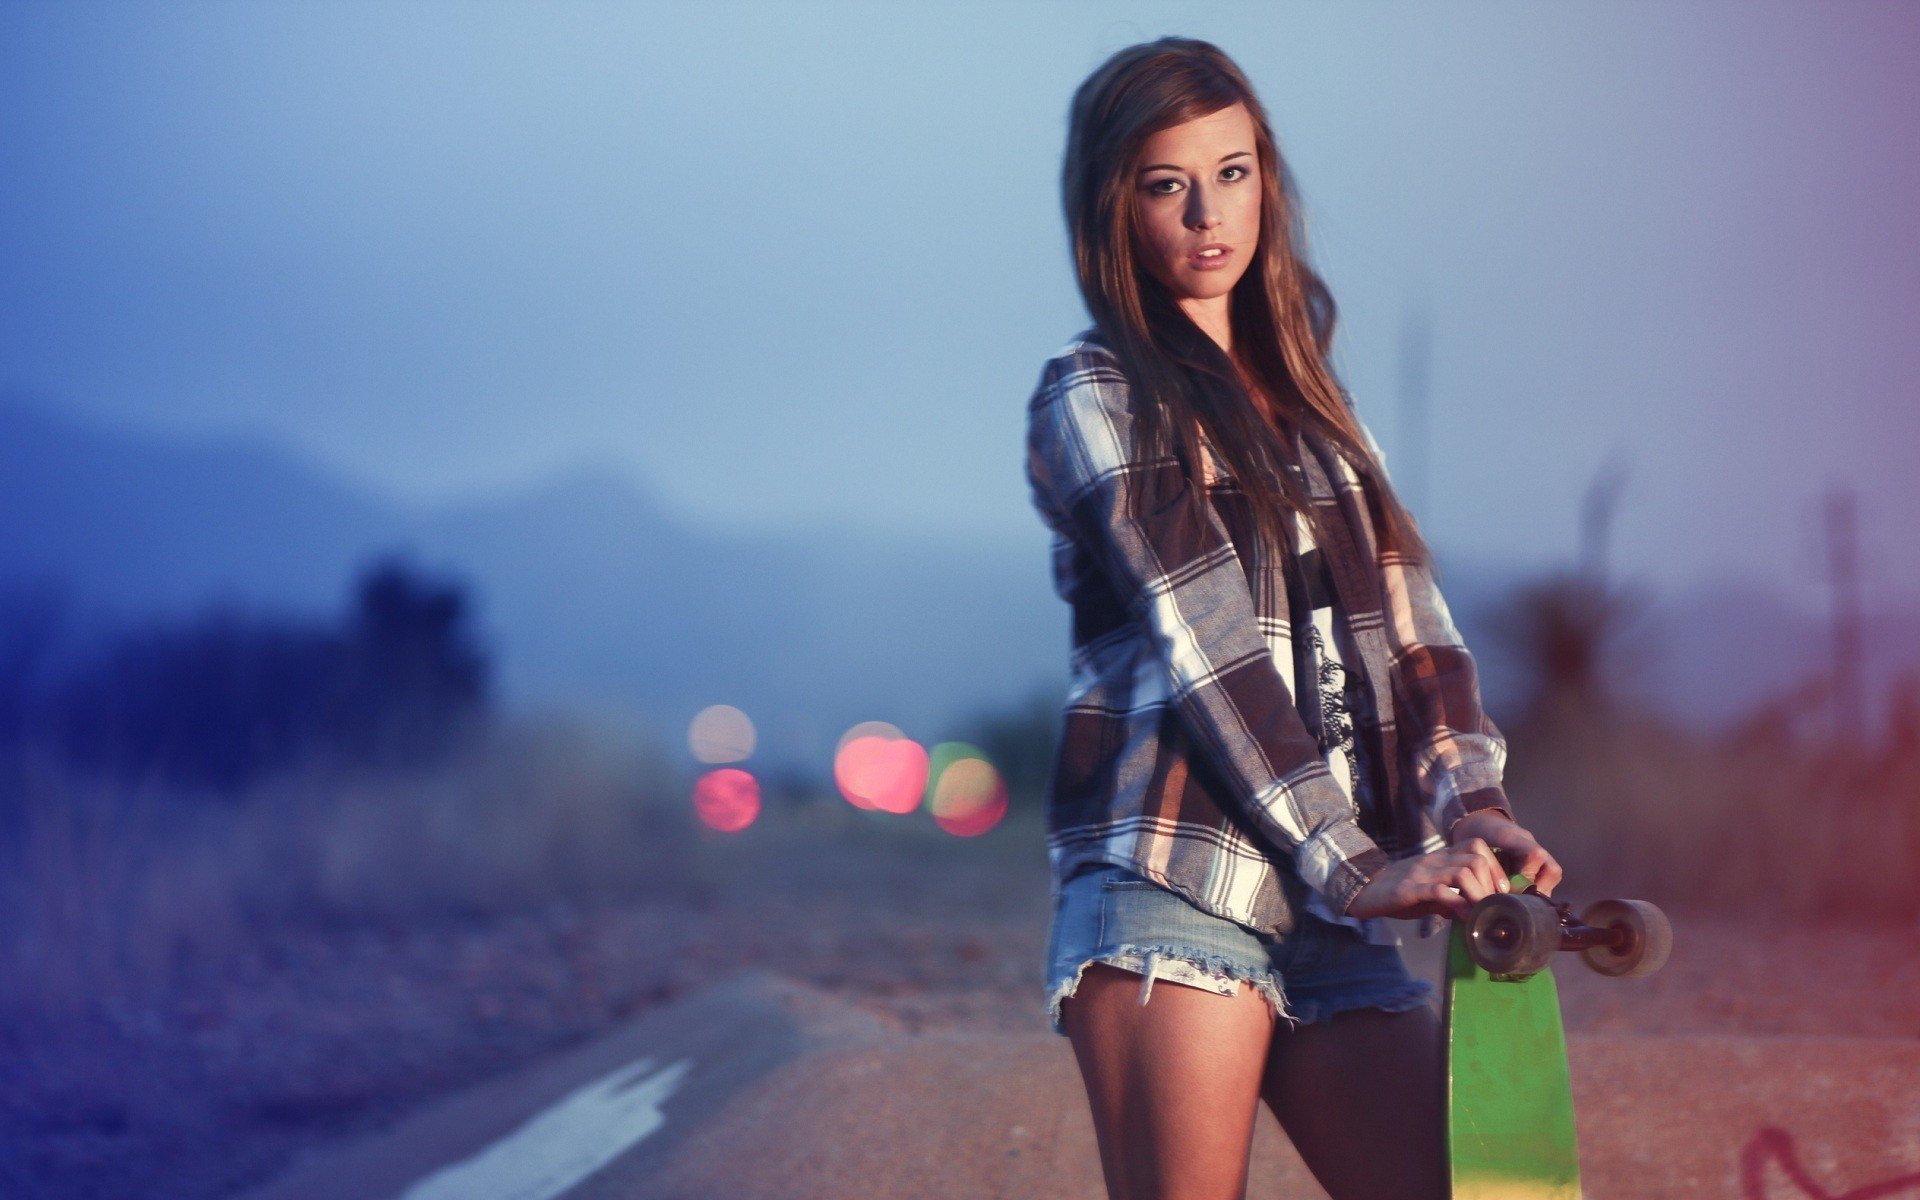 Beautiful girl with a skateboard swag Desktop wallpapers 640x480